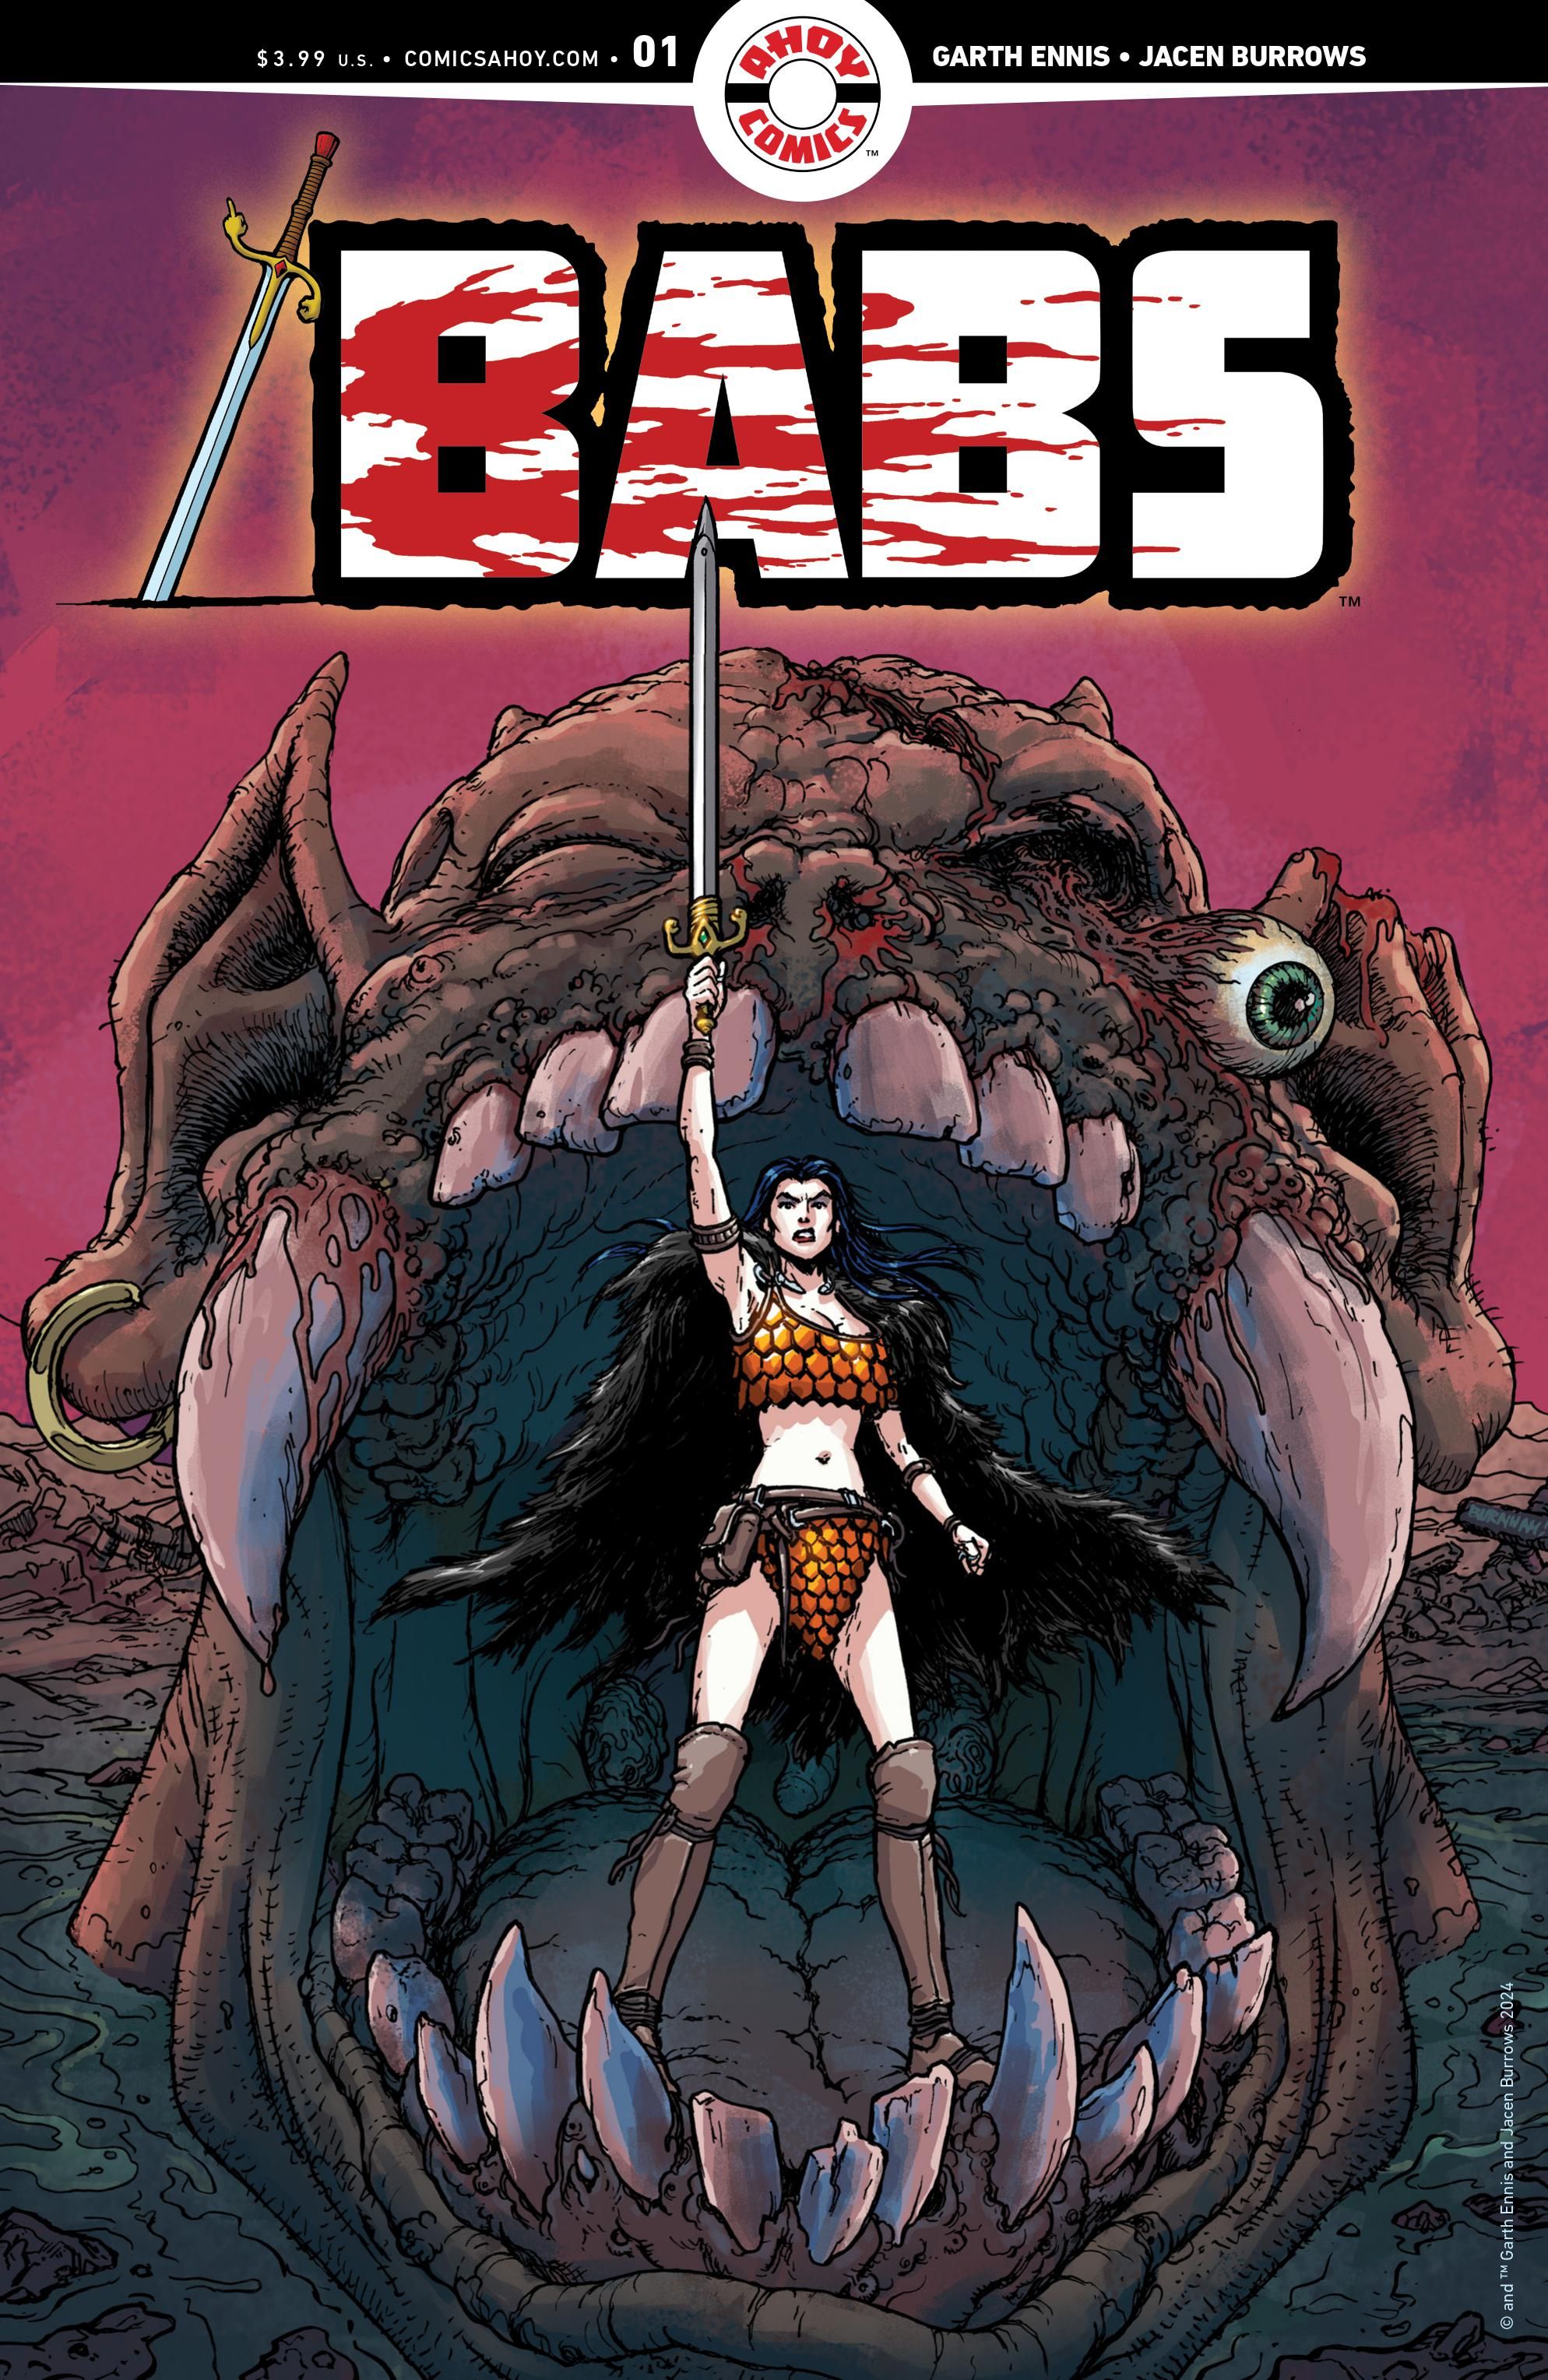 Variant cover for Garth Ennis' series BABS, featuring the protagonist holding a sword in front of a monster's mouth